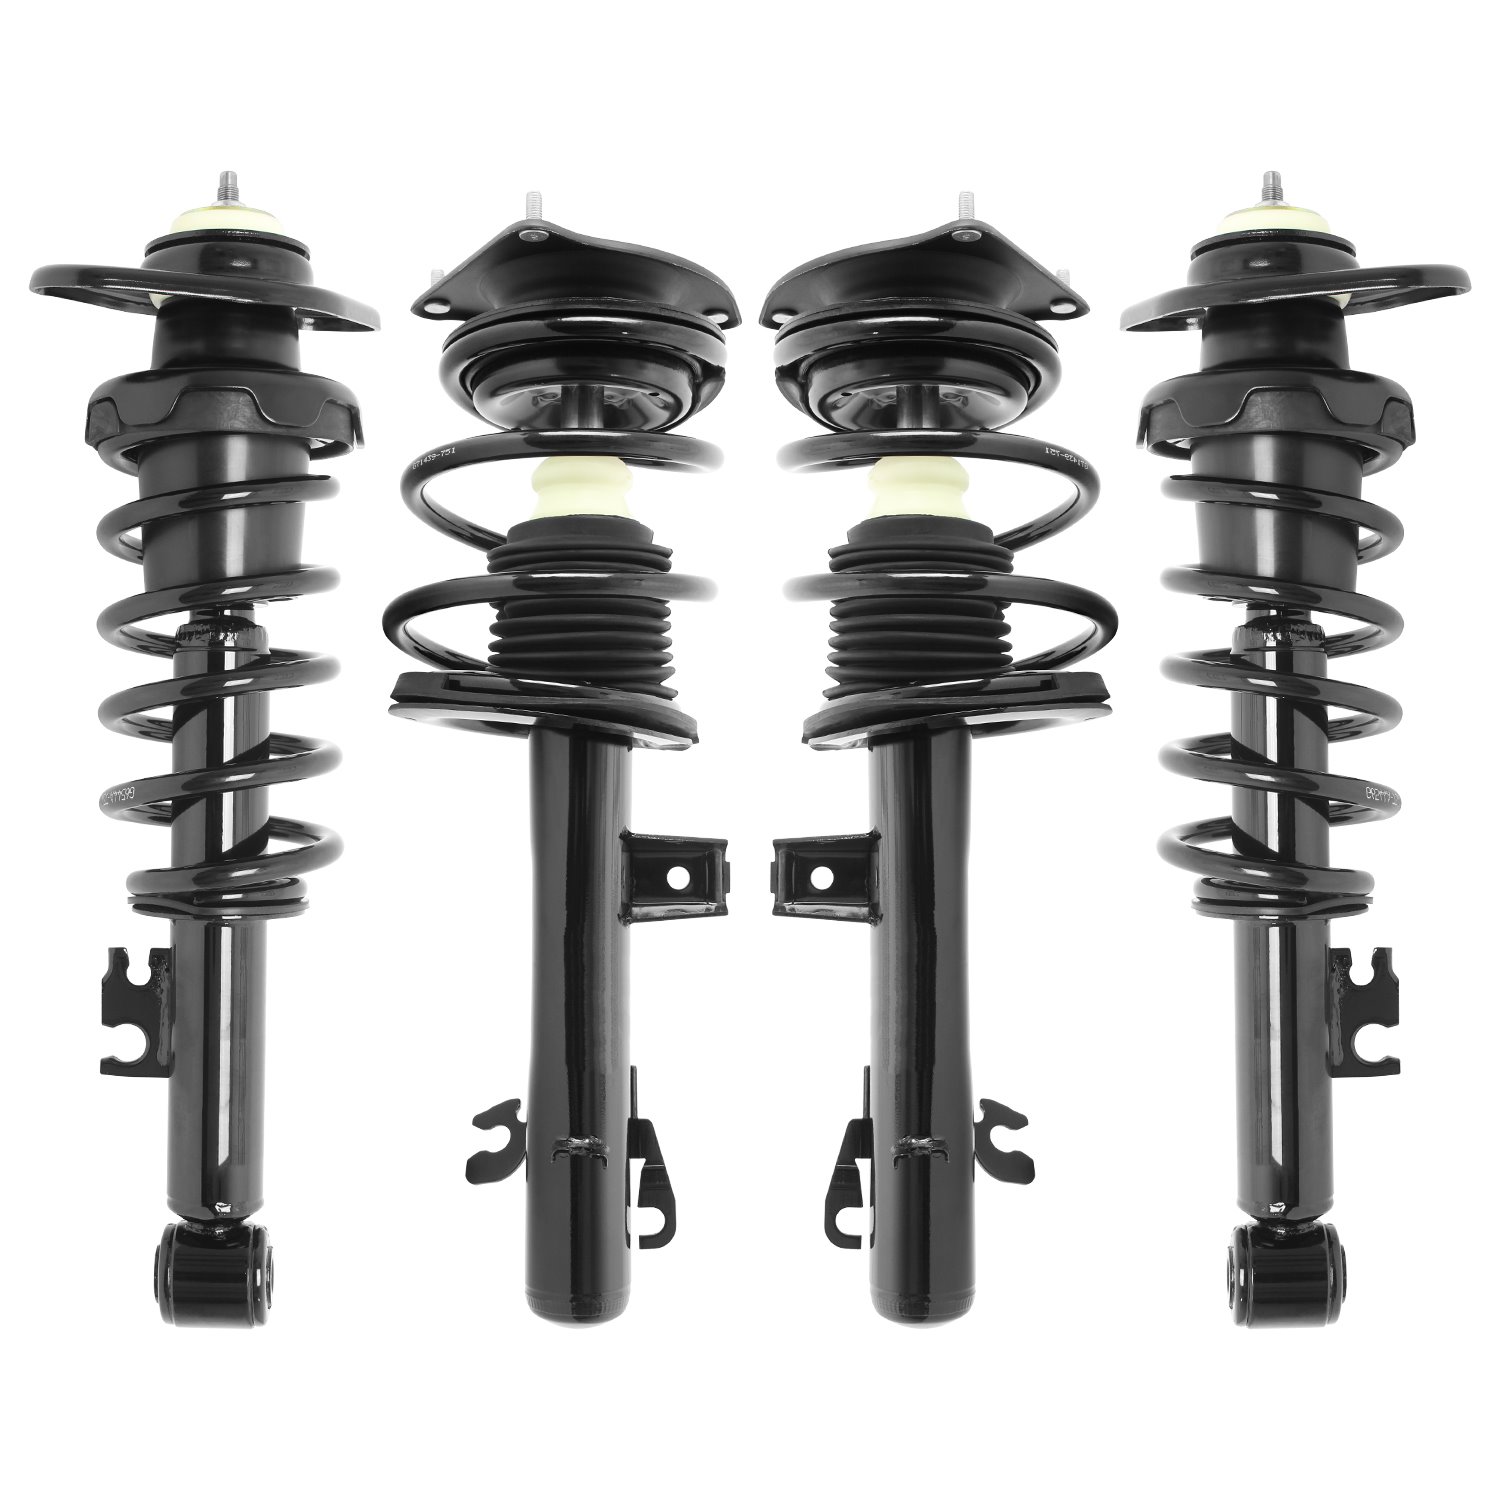 4-11955-15131-001 Front & Rear Suspension Strut & Coil Spring Assembly Kit Fits Select Mini Cooper